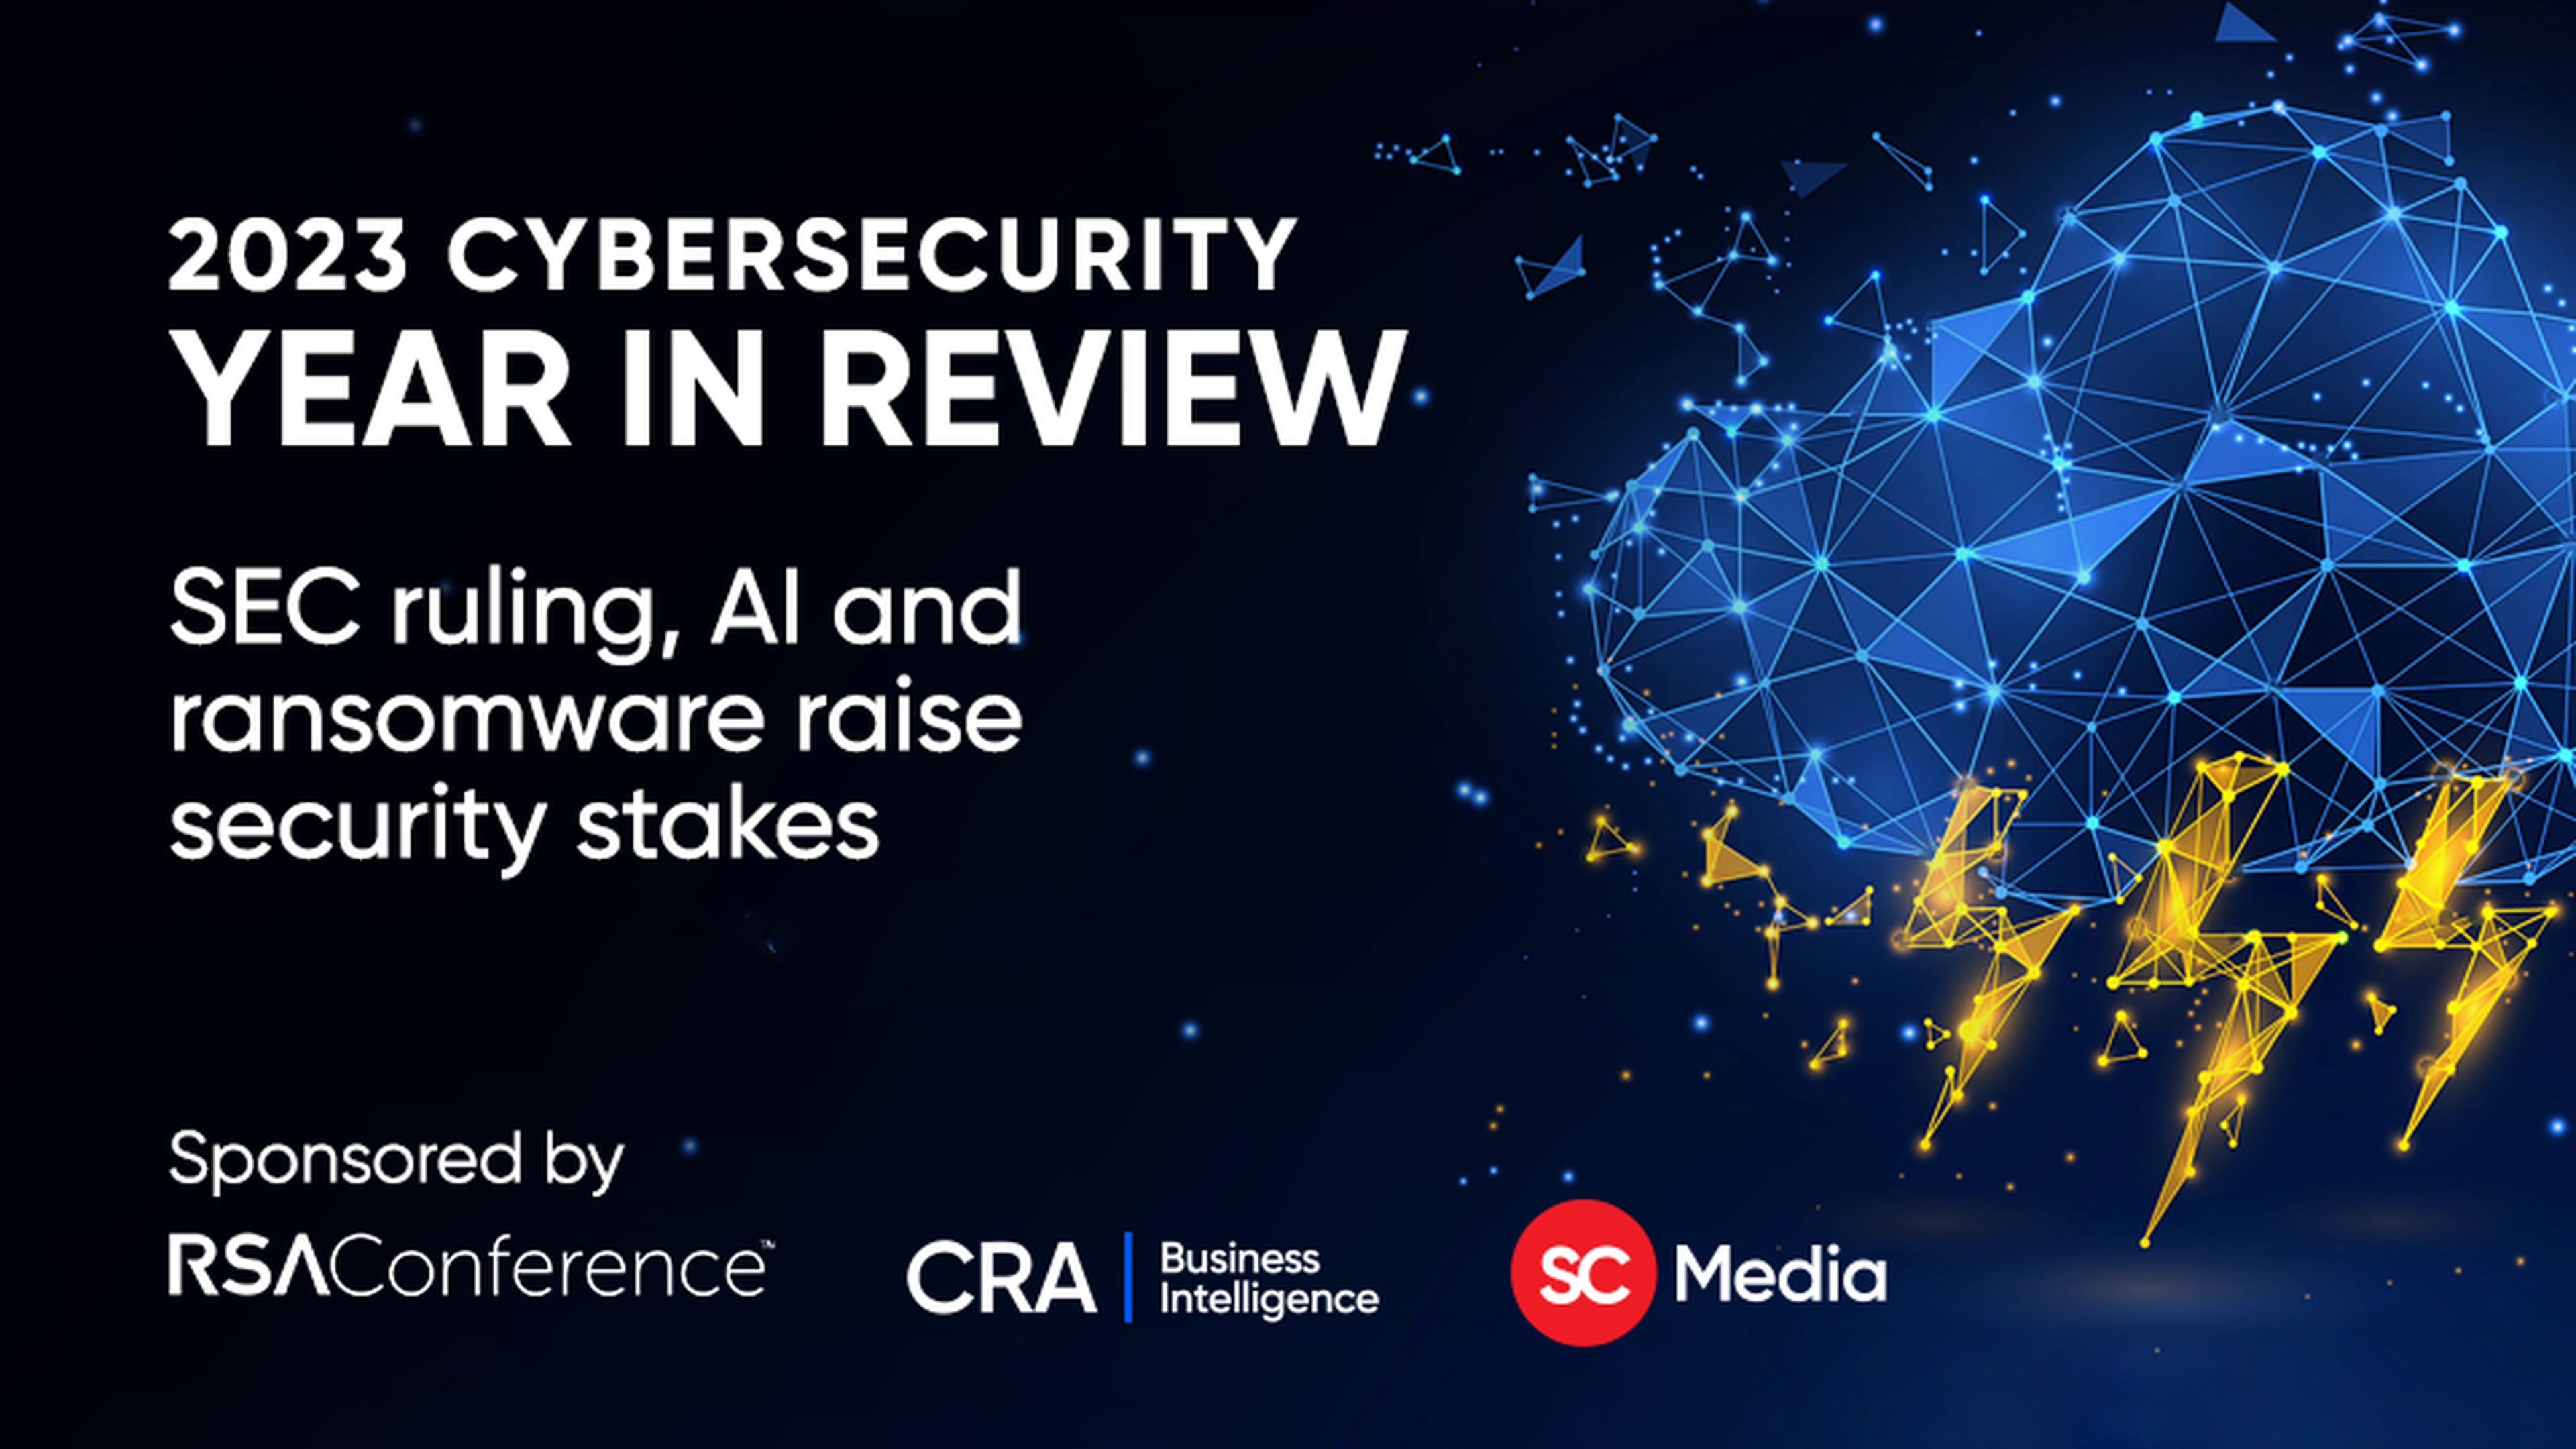 2023 Cybersecurity Year in Review: How AI, Cloud, Ransomware and the SEC raised security stakes